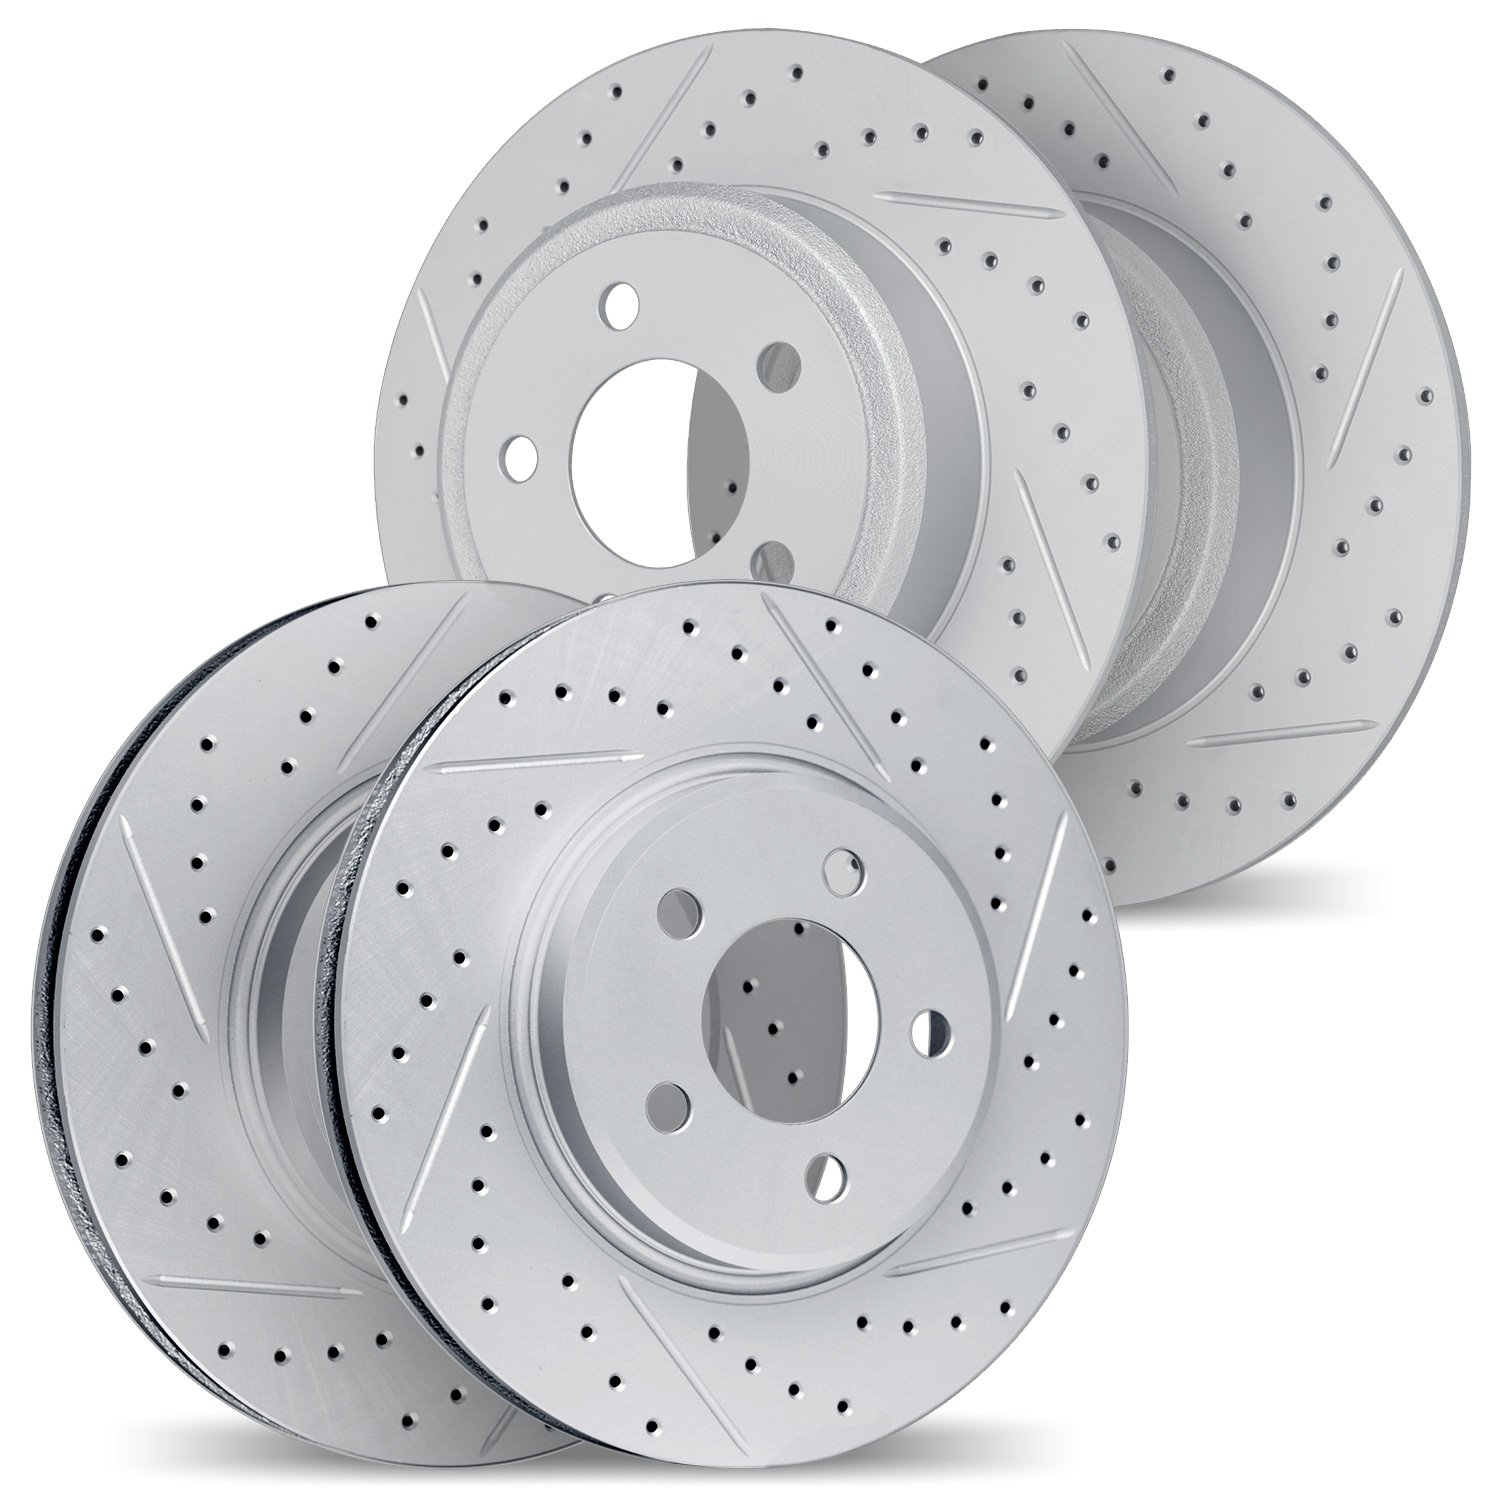 2004-73008 Geoperformance Drilled/Slotted Brake Rotors, Fits Select Audi/Volkswagen, Position: Front and Rear